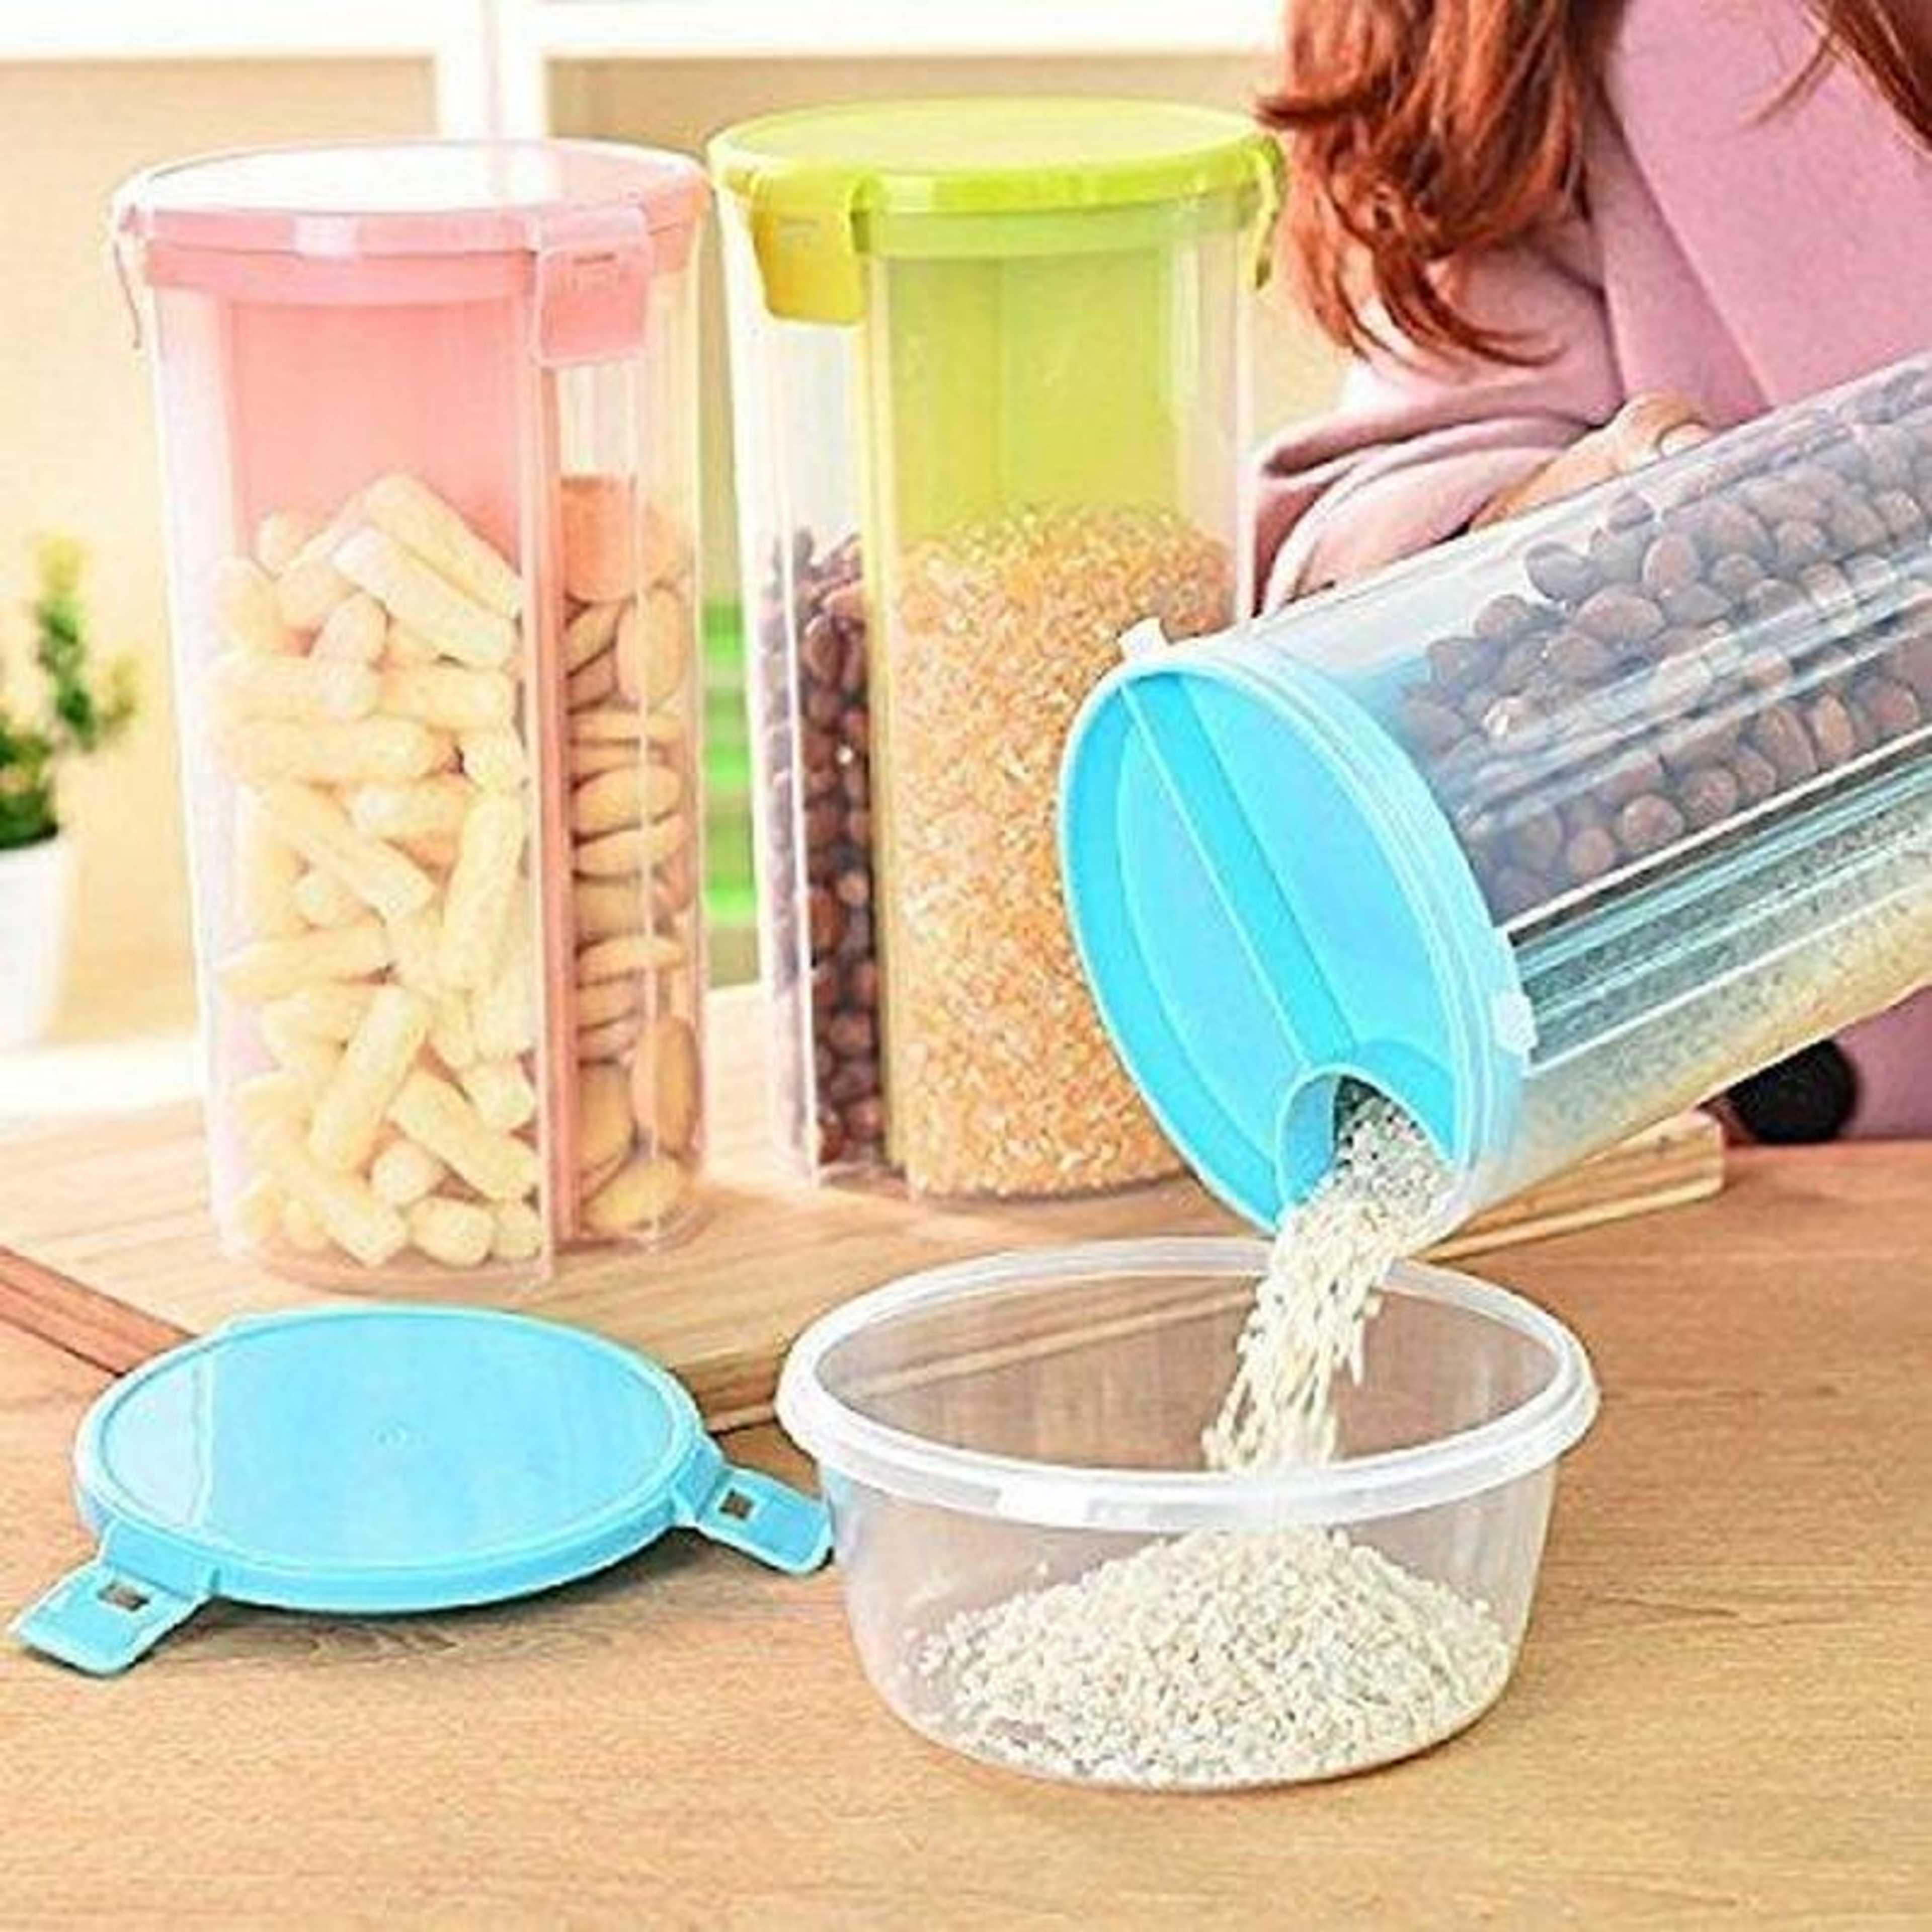 3 Compartment 3 in 1 Food Storage Jar, Cereal Dispenser, Pulses Container